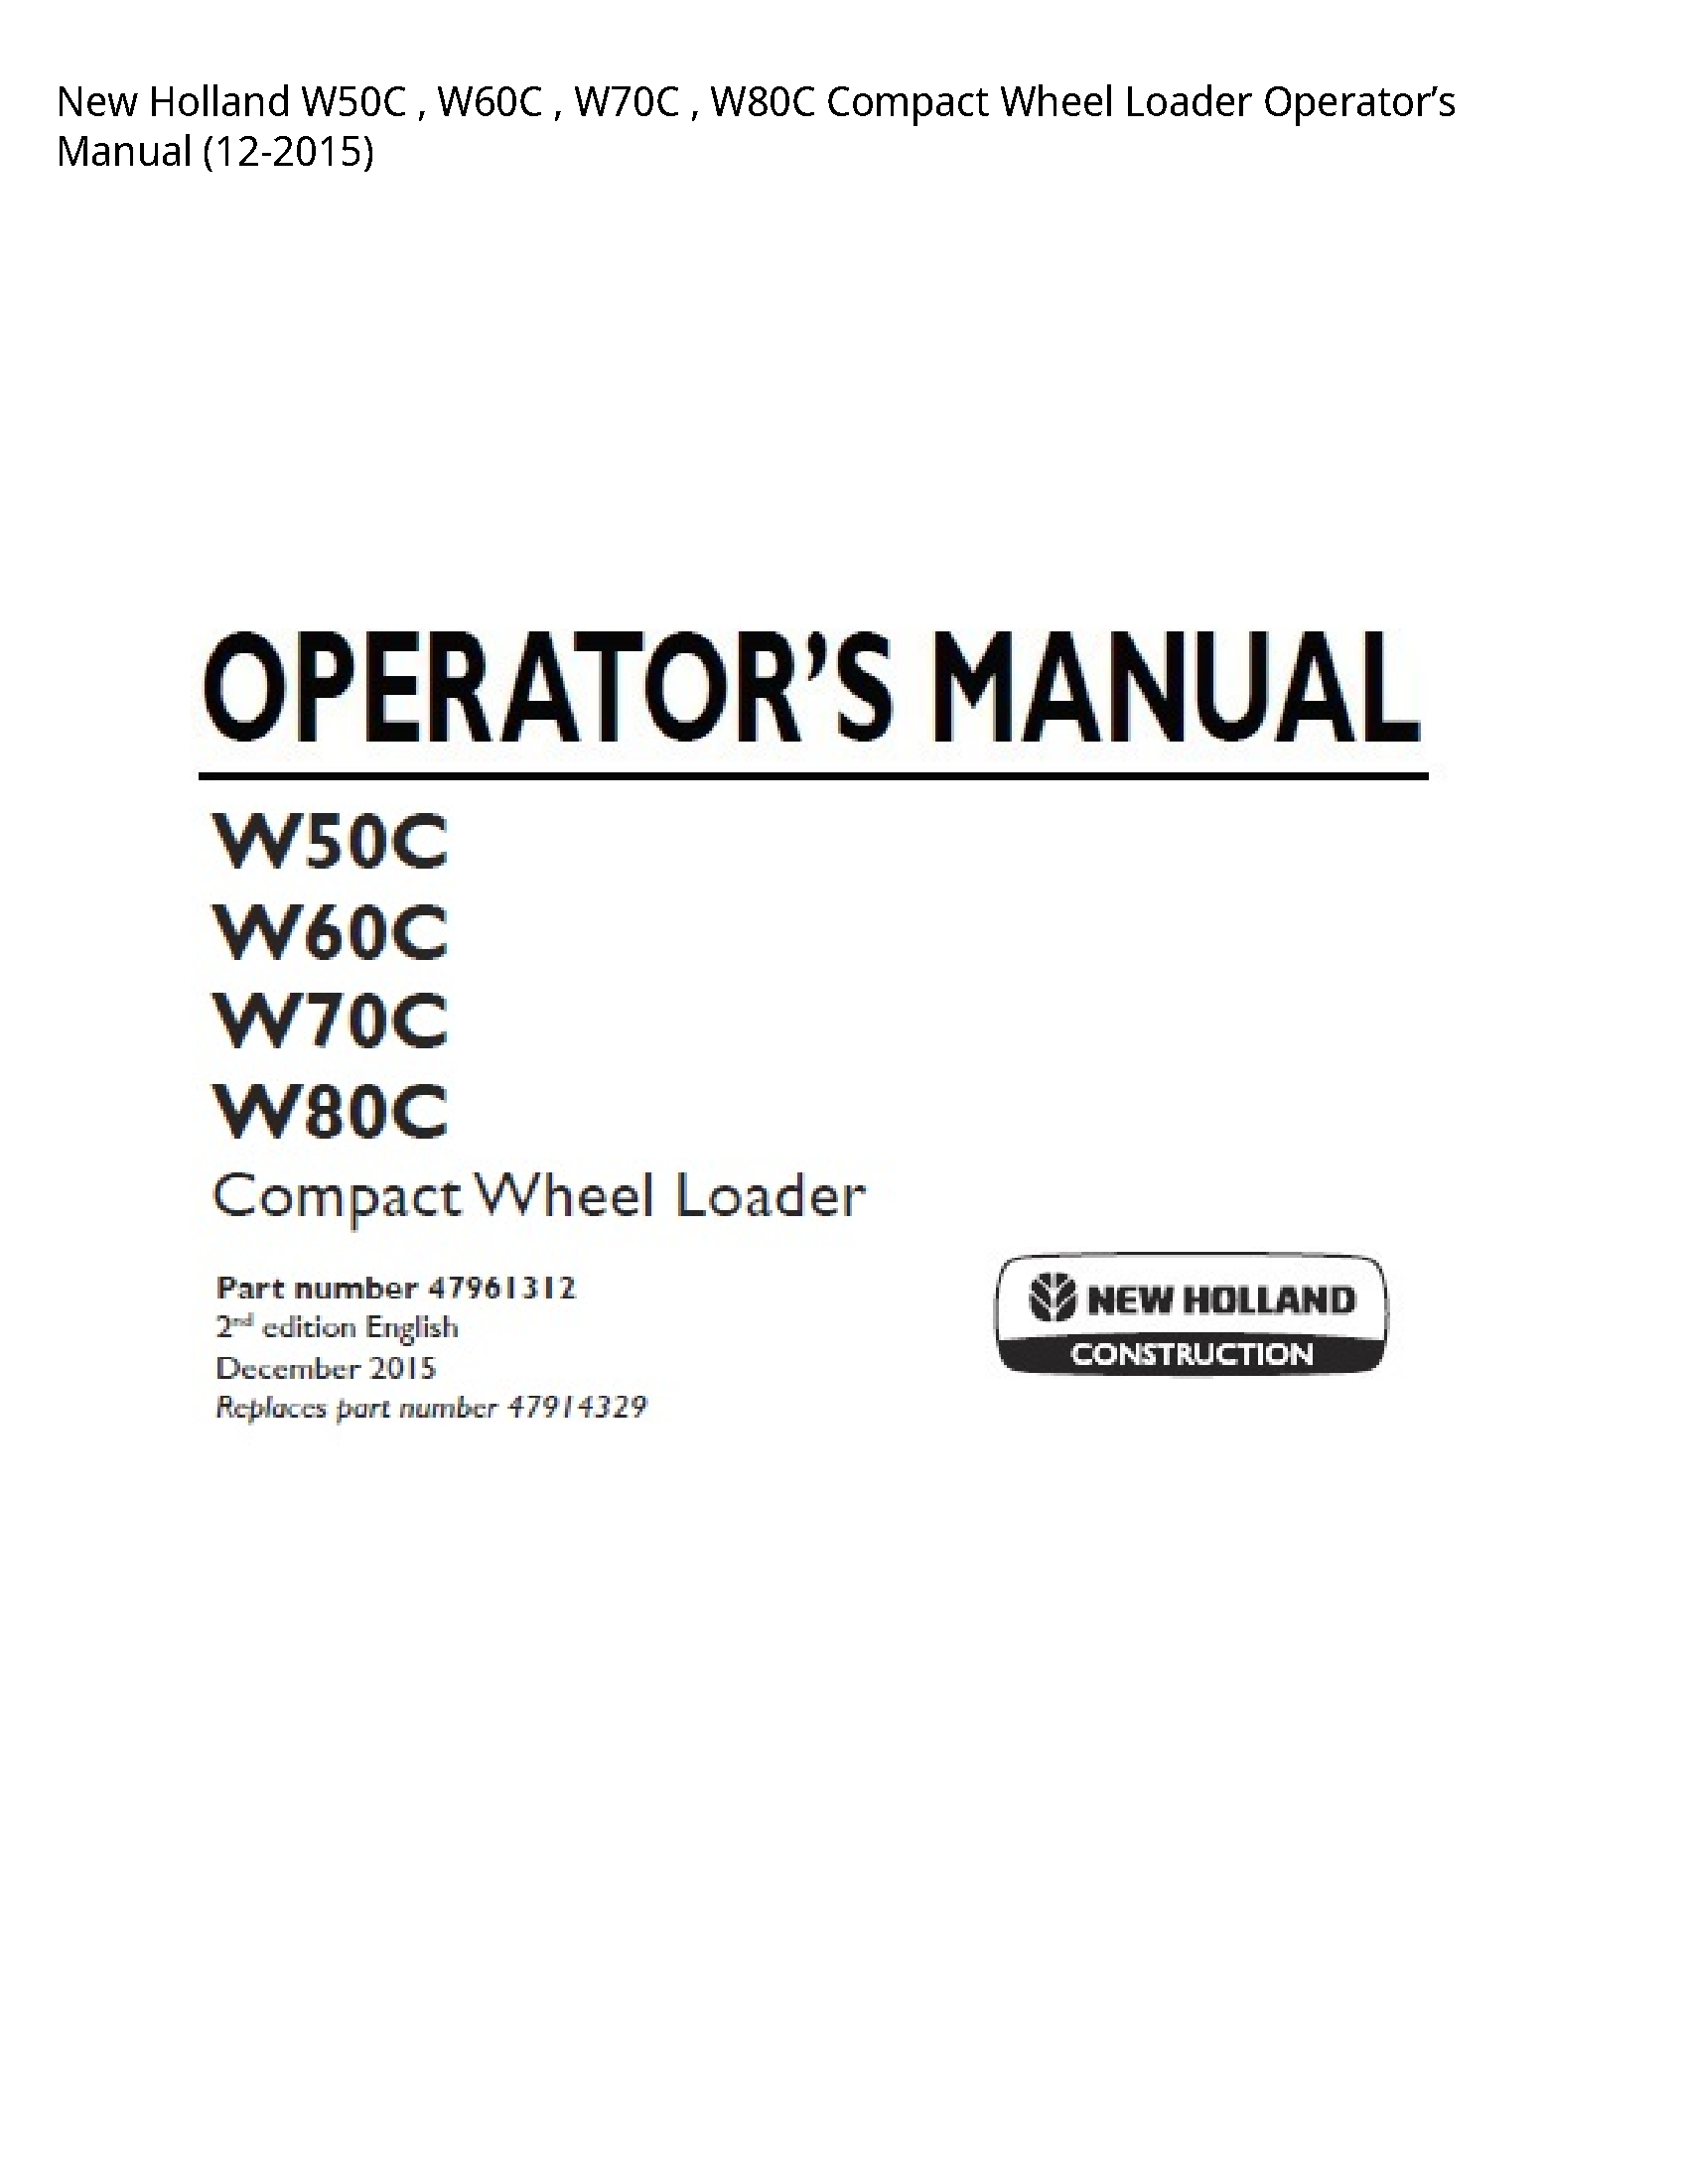 New Holland W50C Compact Wheel Loader Operator’s manual